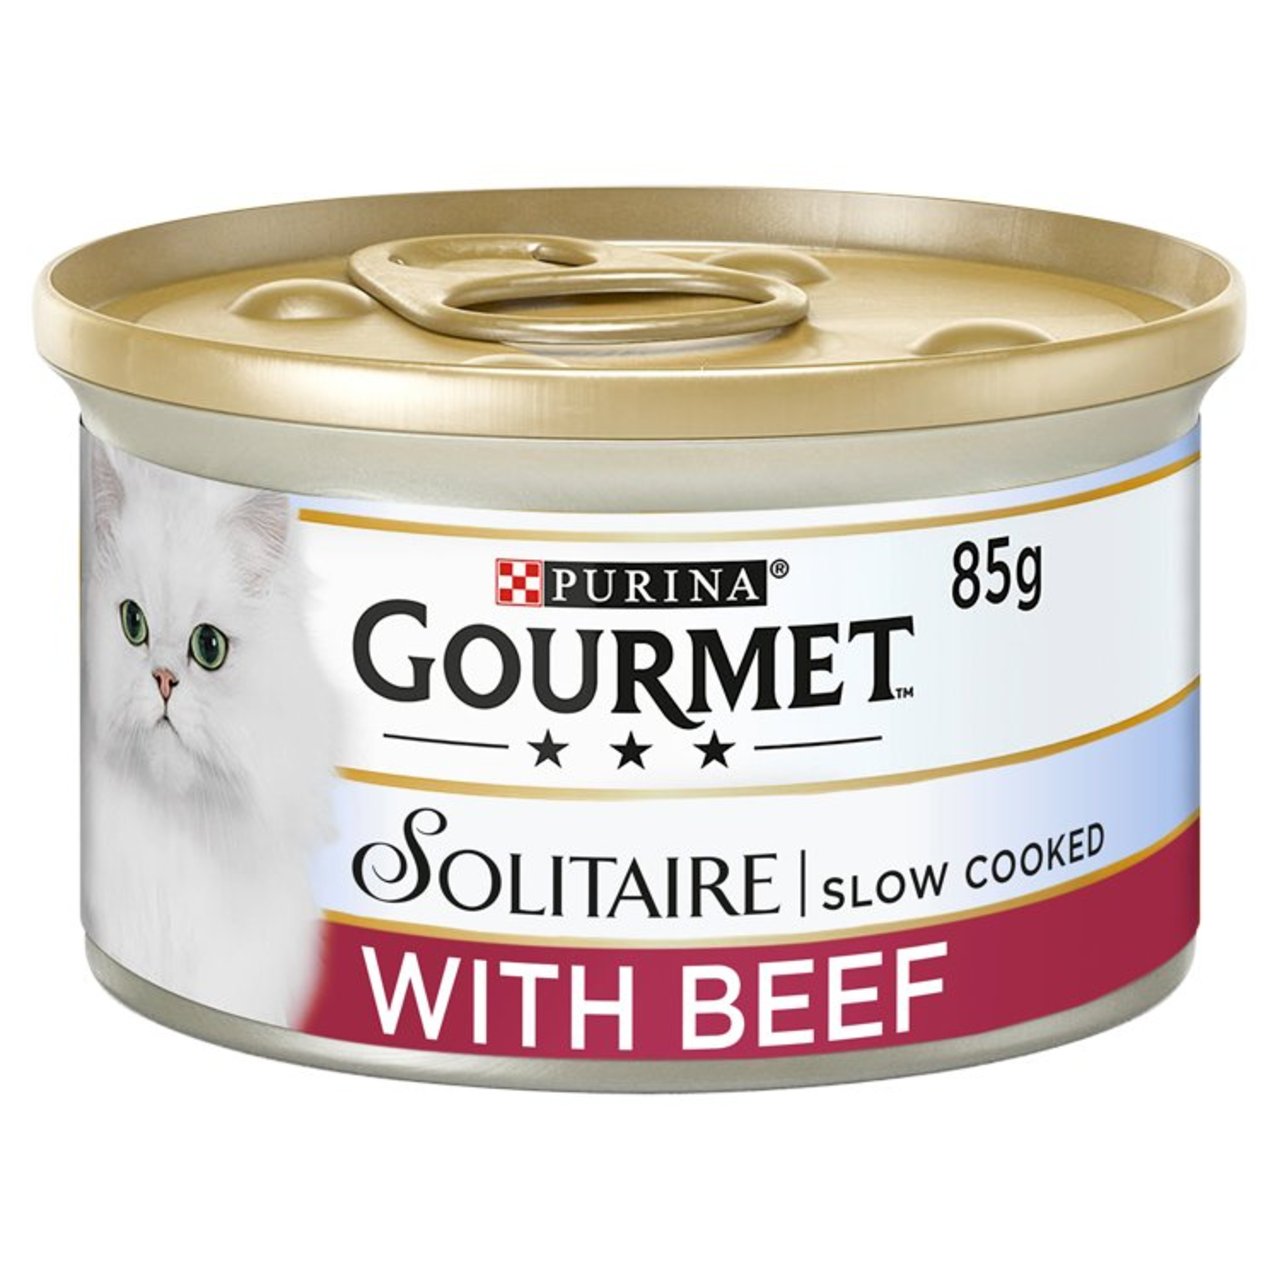 An image of Gourmet Solitaire Beef in Tomato Sauce